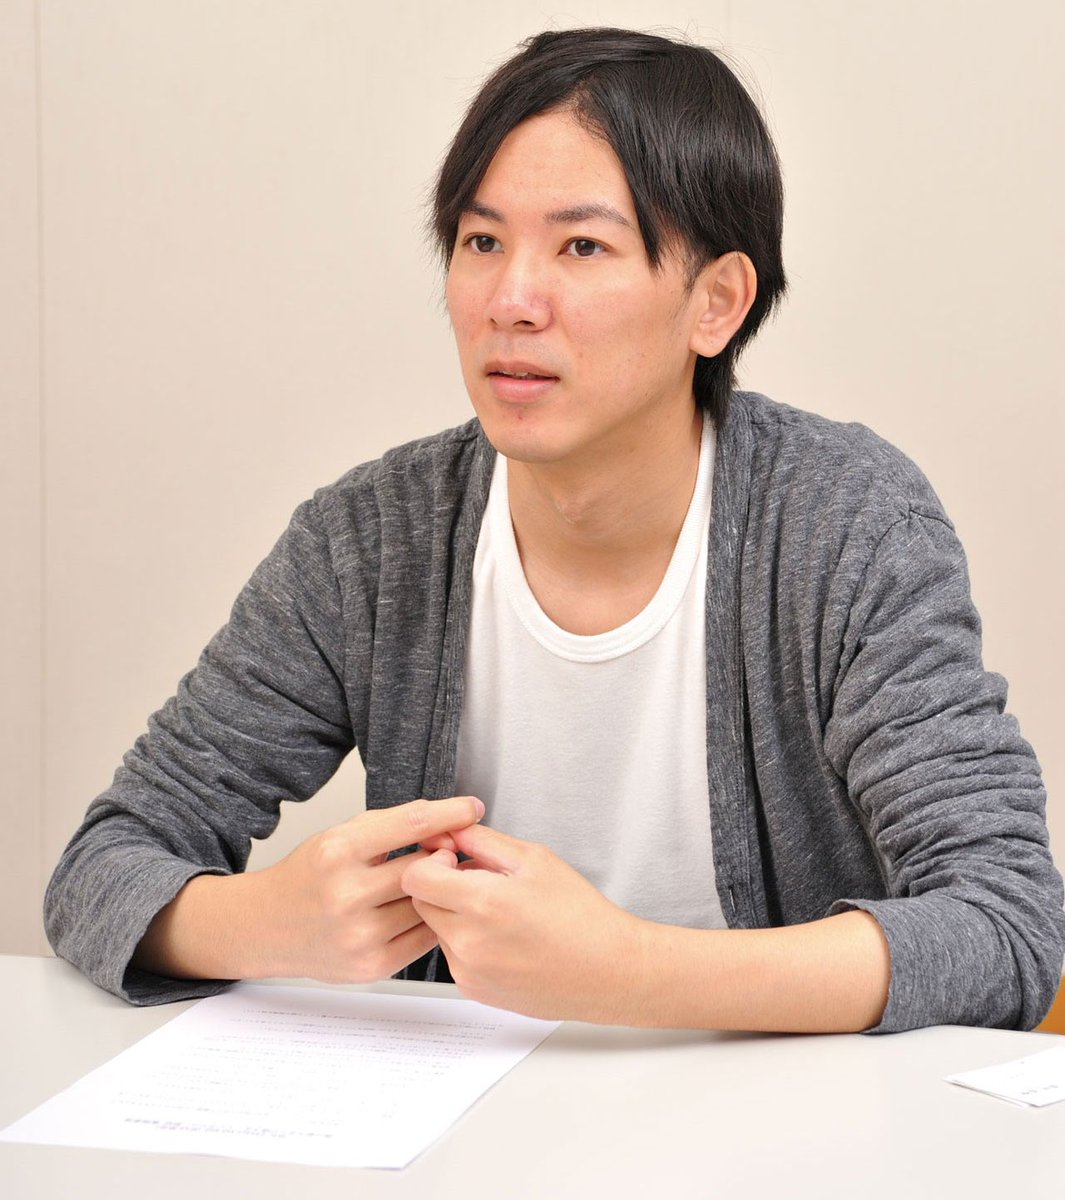 'Attack on titan' creator Hajime Isayama confirms Jeankasa is canon. 'They’re married and happy'